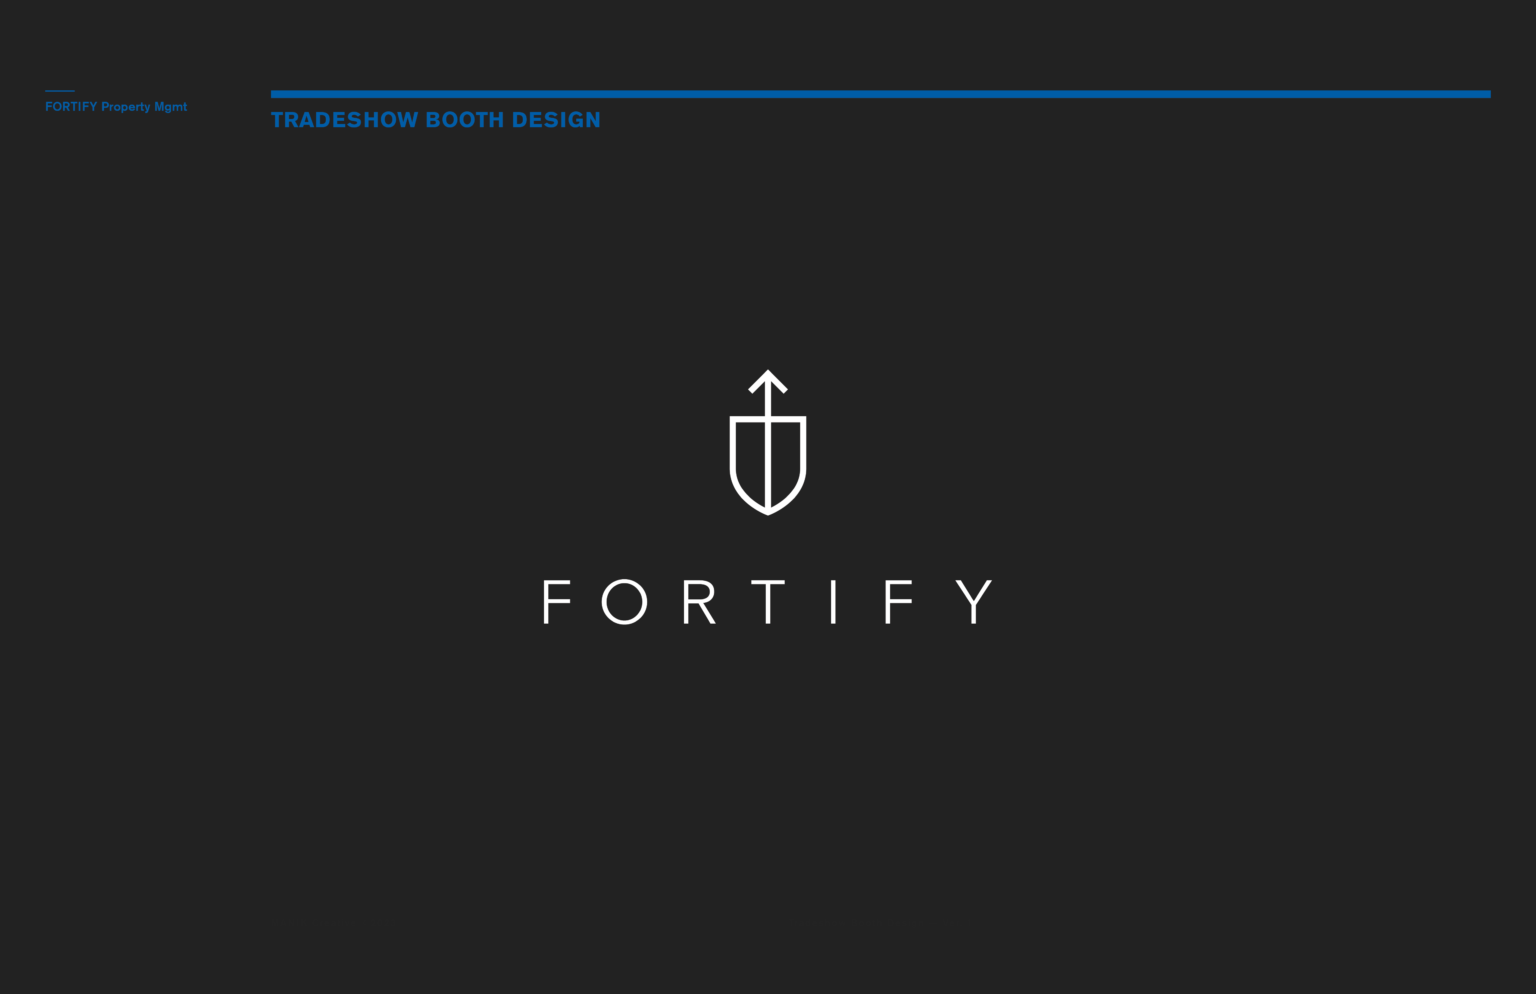 Fortify_BoothDesign_v.01-01